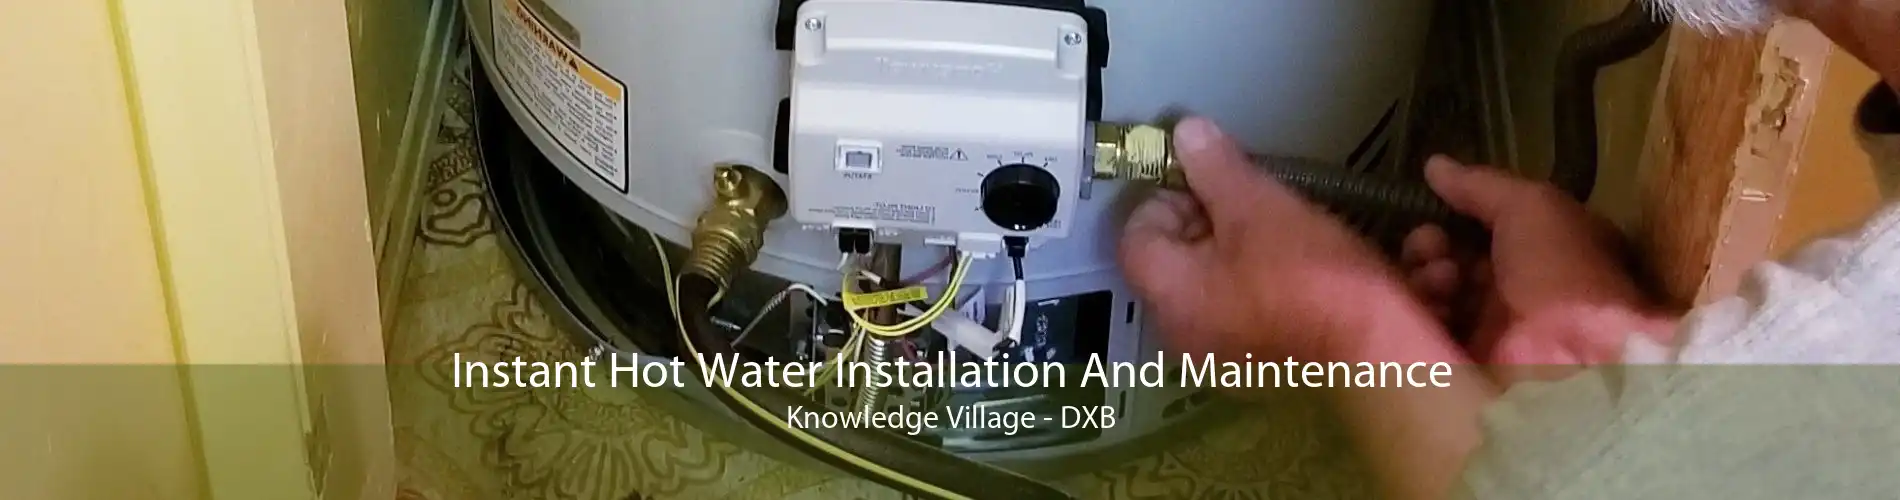 Instant Hot Water Installation And Maintenance Knowledge Village - DXB